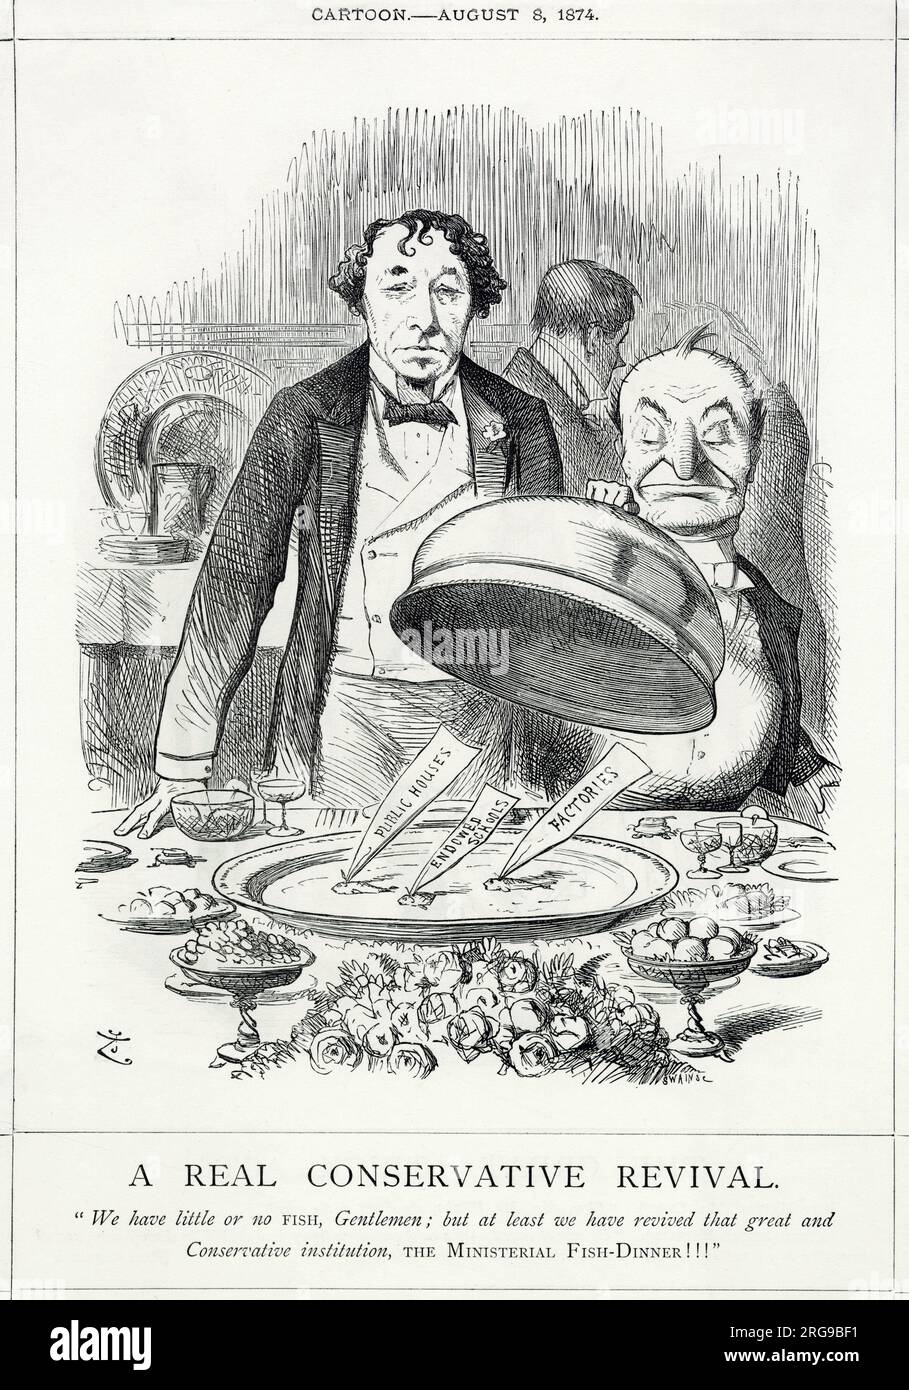 Cartoon, A Real Conservative Revival -- a satirical comment on the small number of parliamentary measures passed by the new Conservative government, compared with the previous Liberal administration. Disraeli assumes a poker face as Mr Punch as waiter lifts the lid on a plate of three very small fish, representing Public Houses, Endowed Schools and Factories. Stock Photo